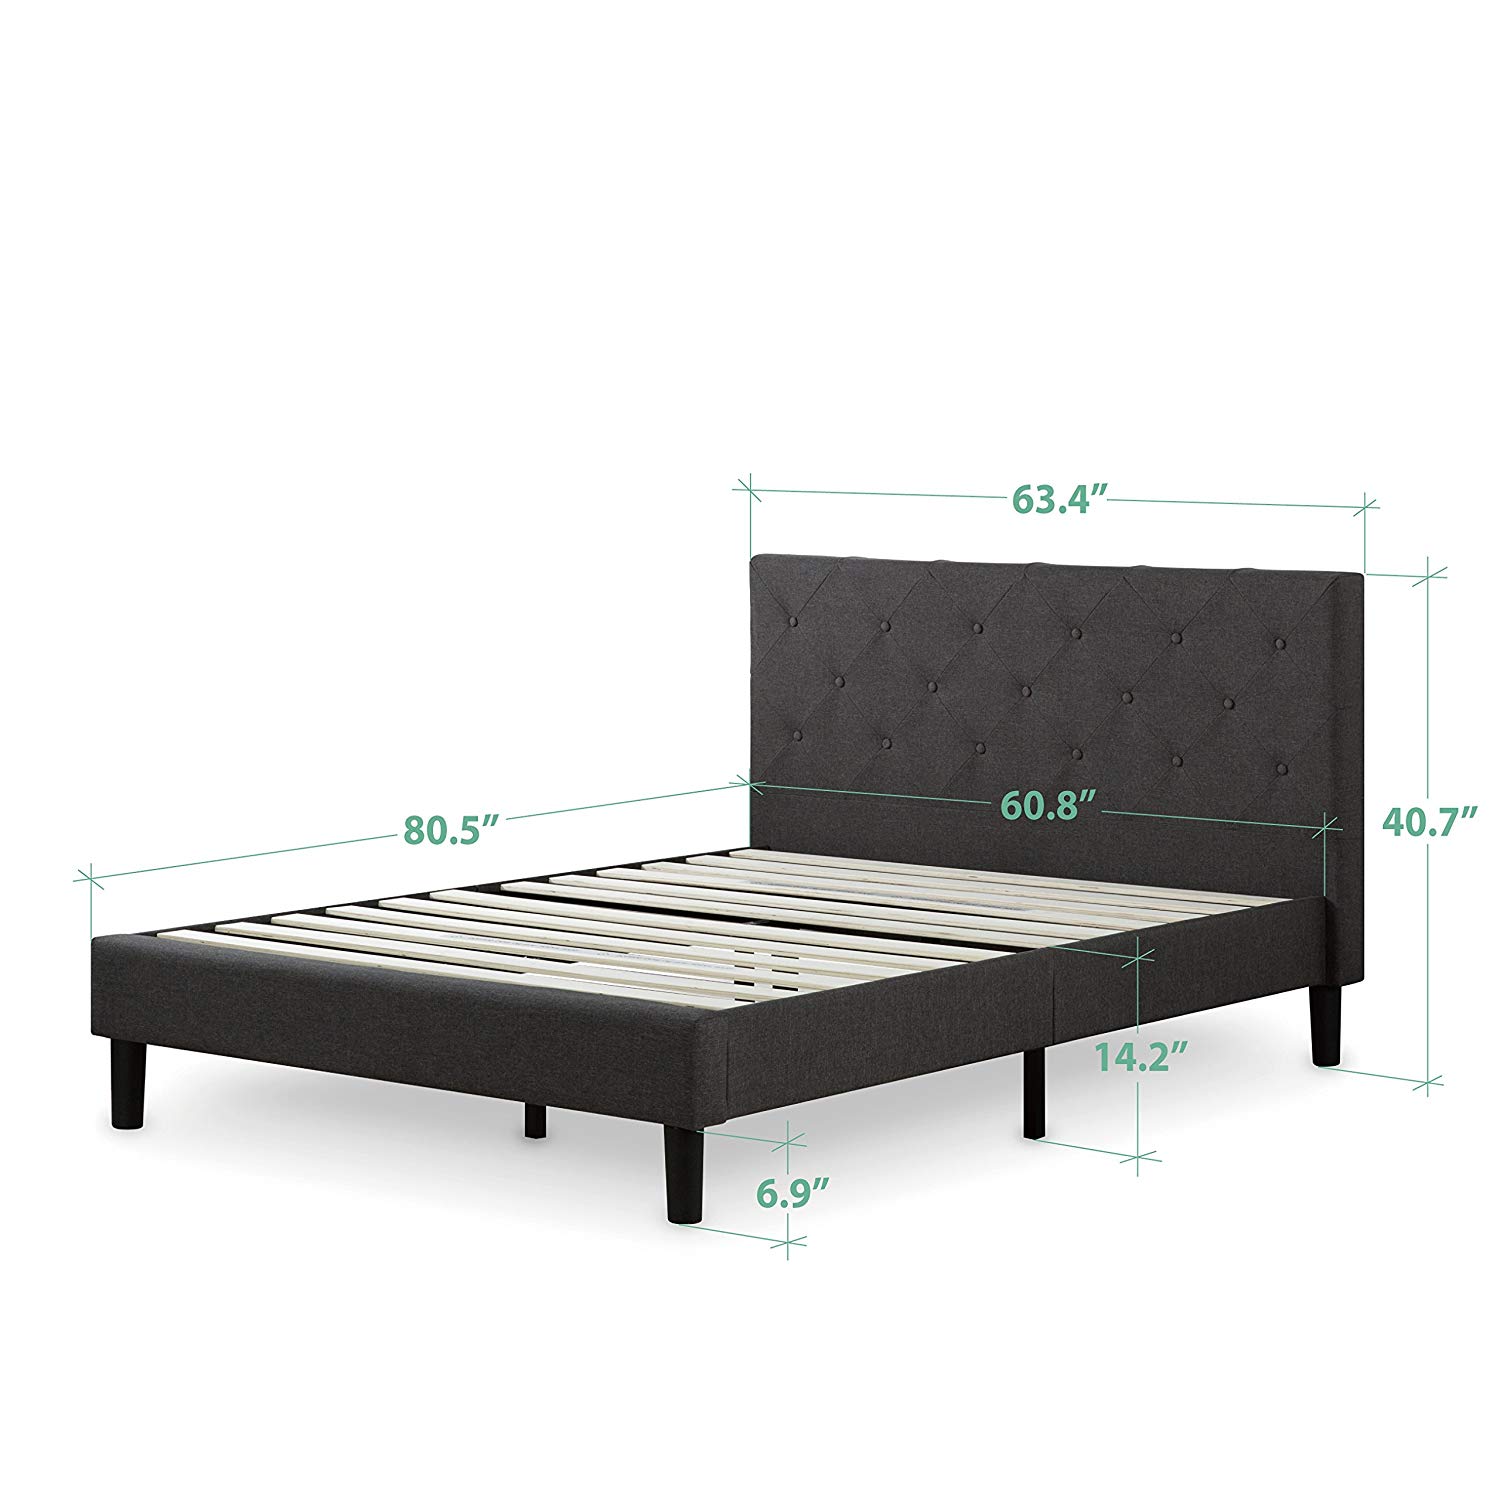 Zinus Diamond Stitched Upholstered Platform Bed review